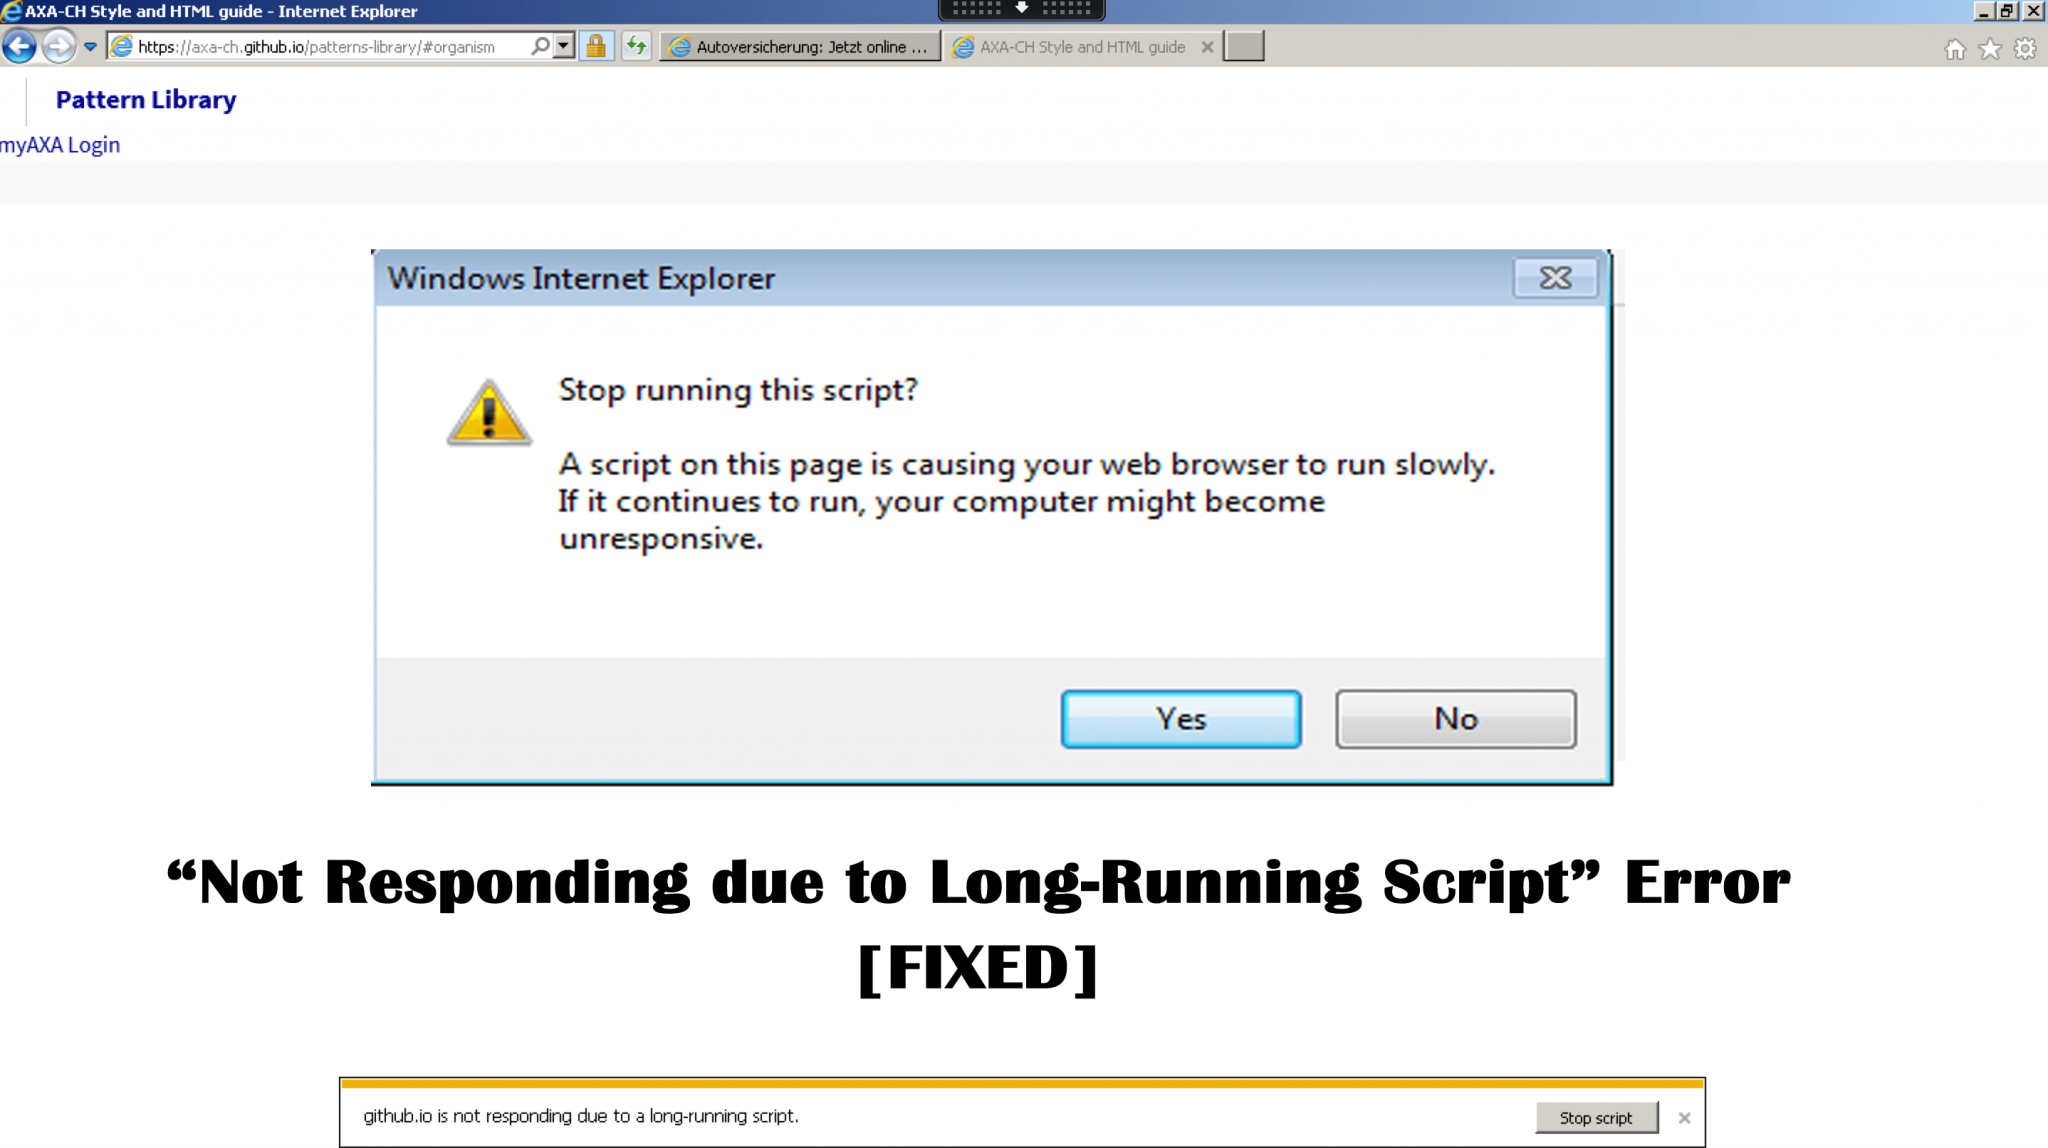 is not responding due to a long running script